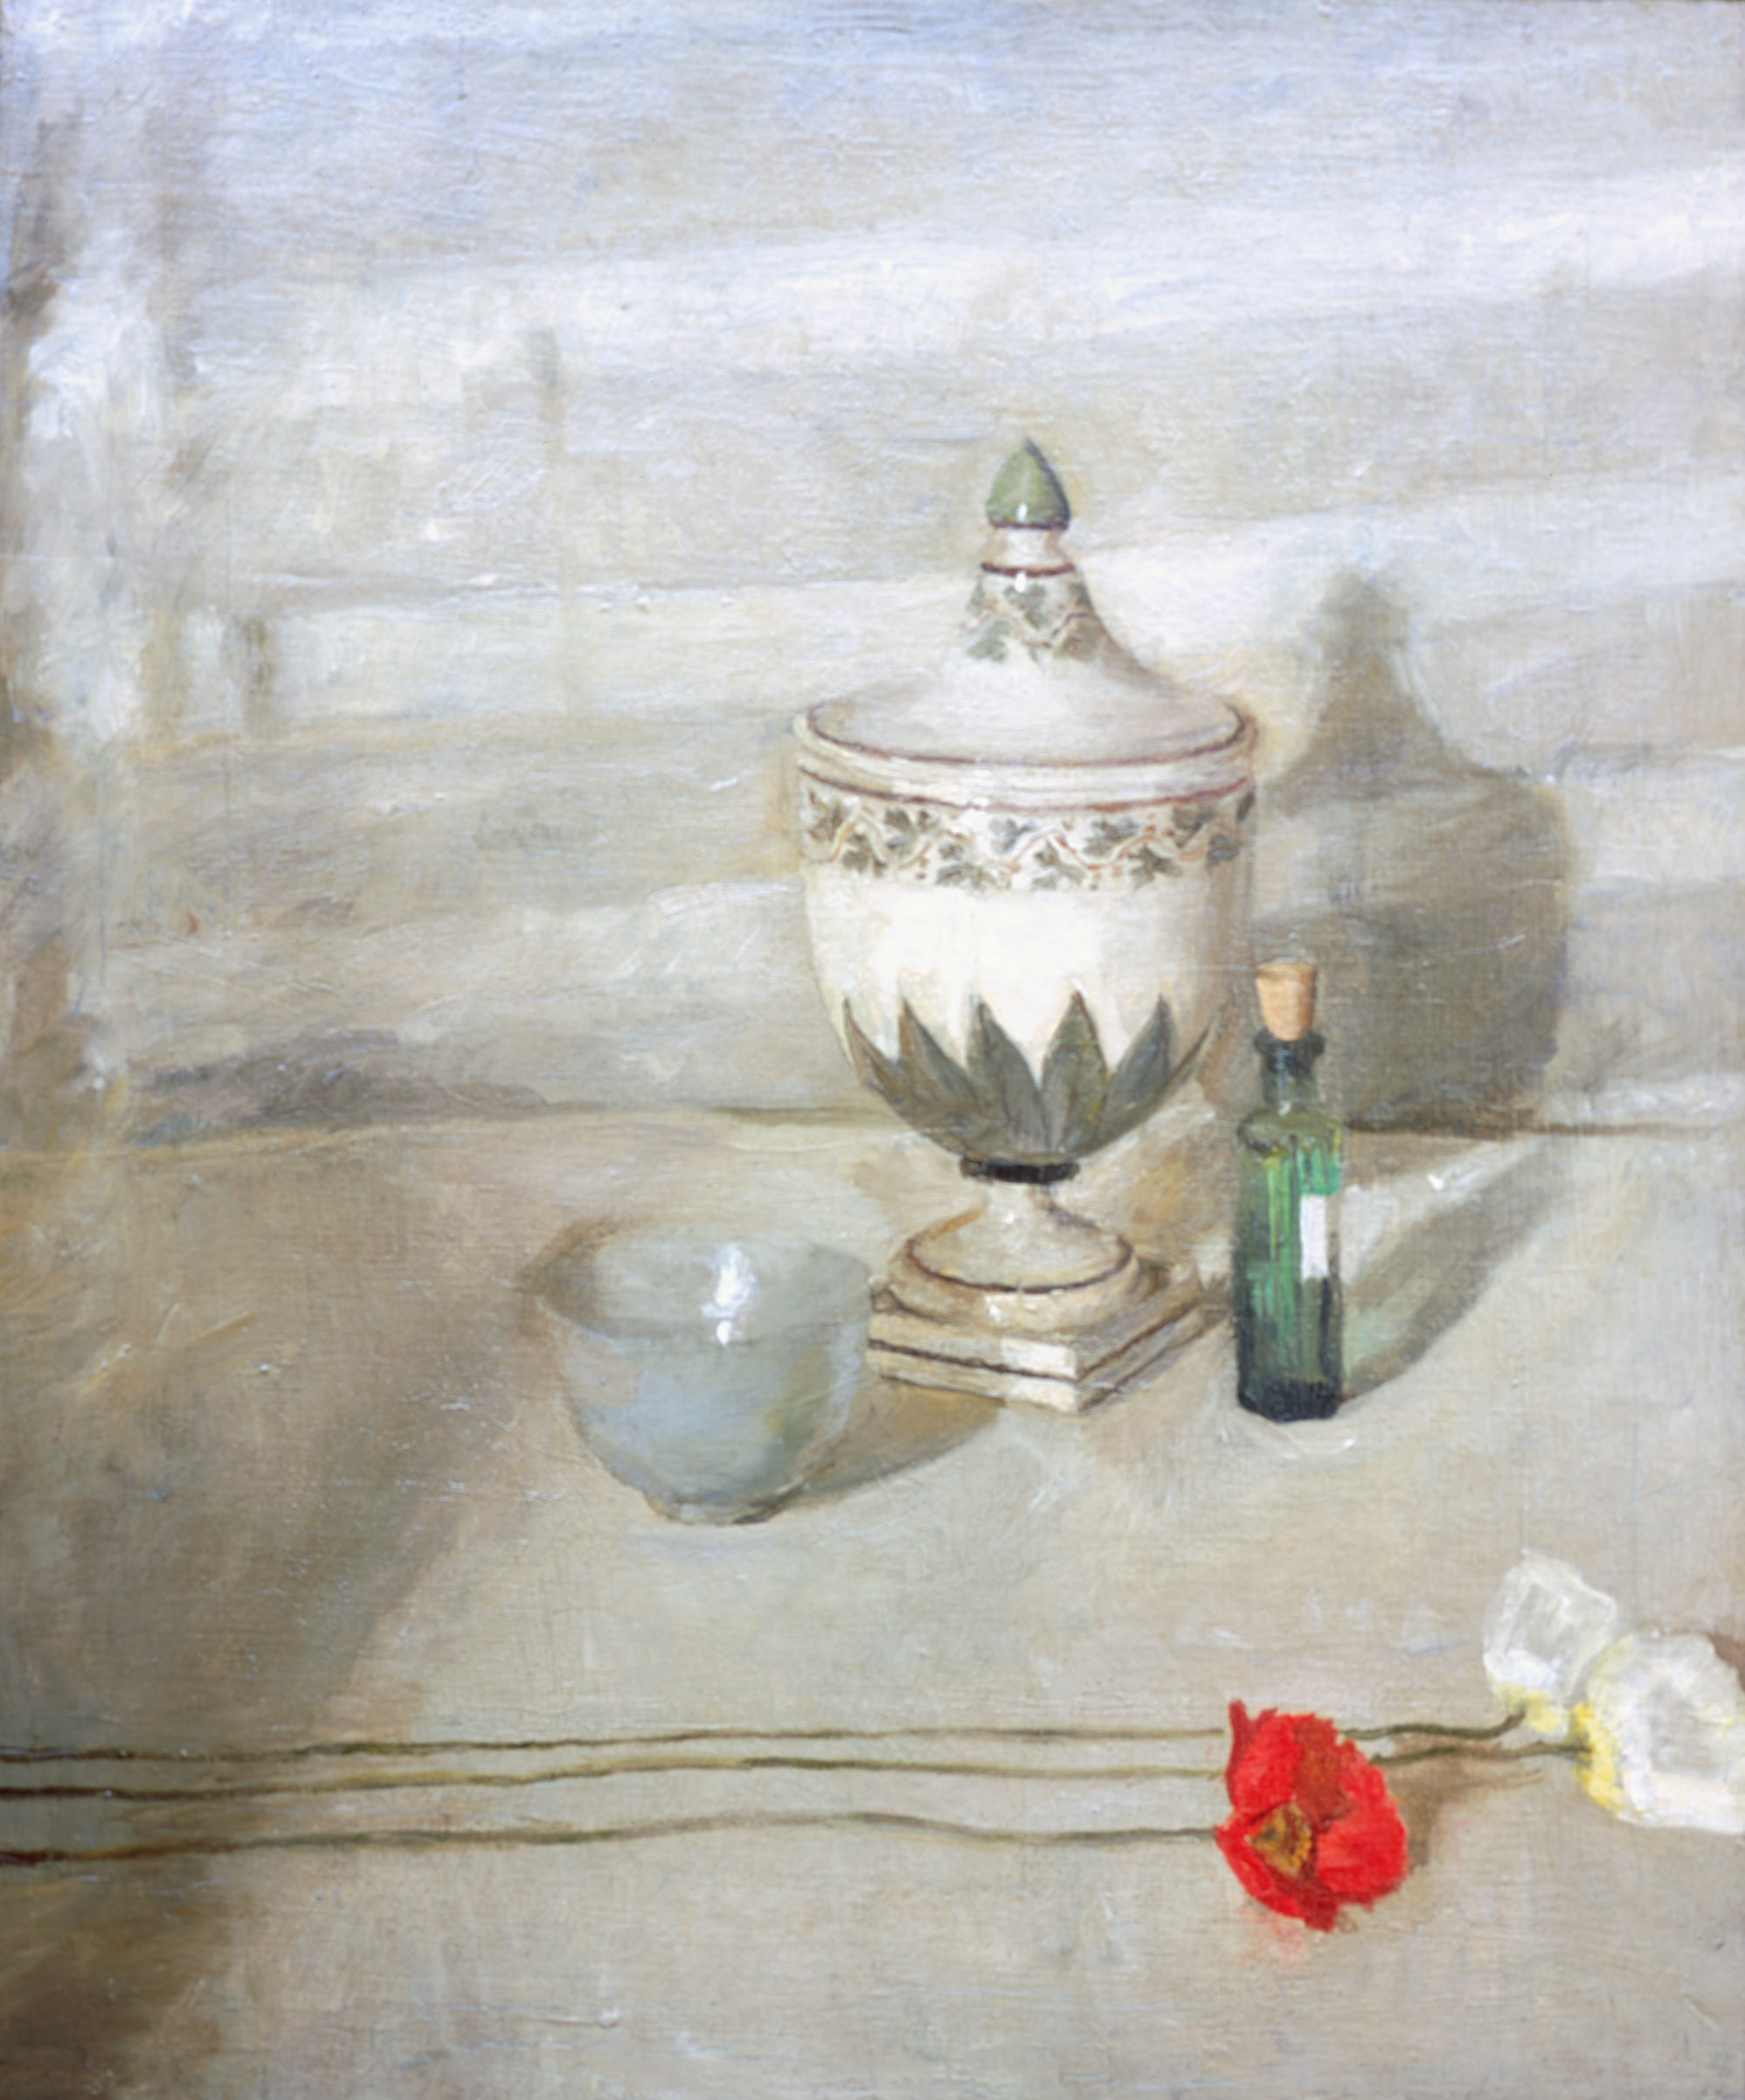 A still life painting of a decorative vase, a small bowl, a small glass bottle and red and white iceland poppies. The colour palette is mostly pale greys and whites, which makes the single red poppy stand out.